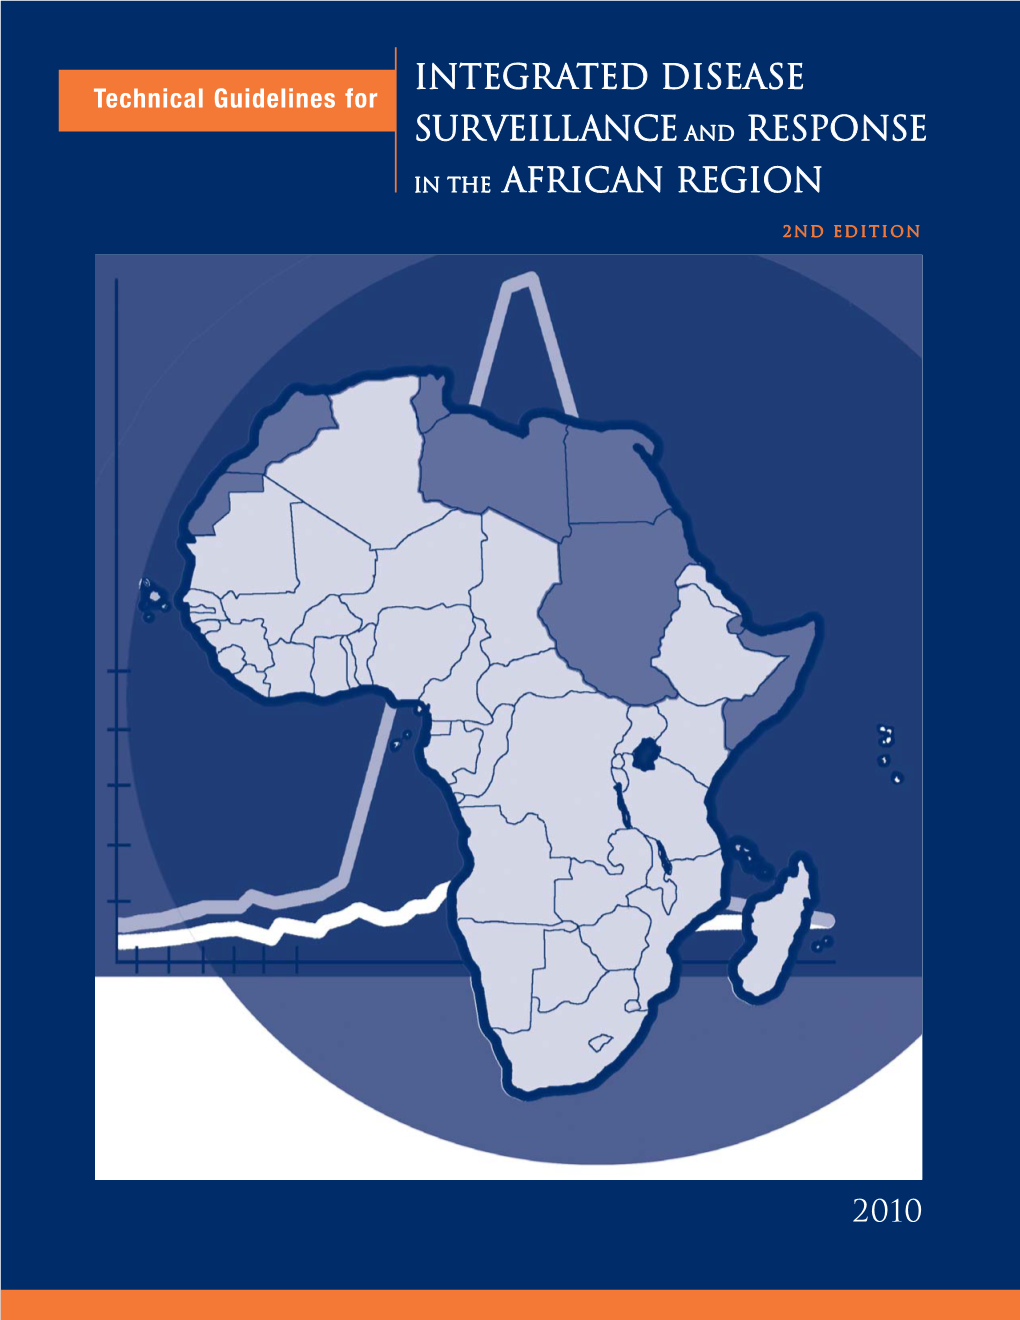 Integrated Disease Surveillance and Response in the African Region